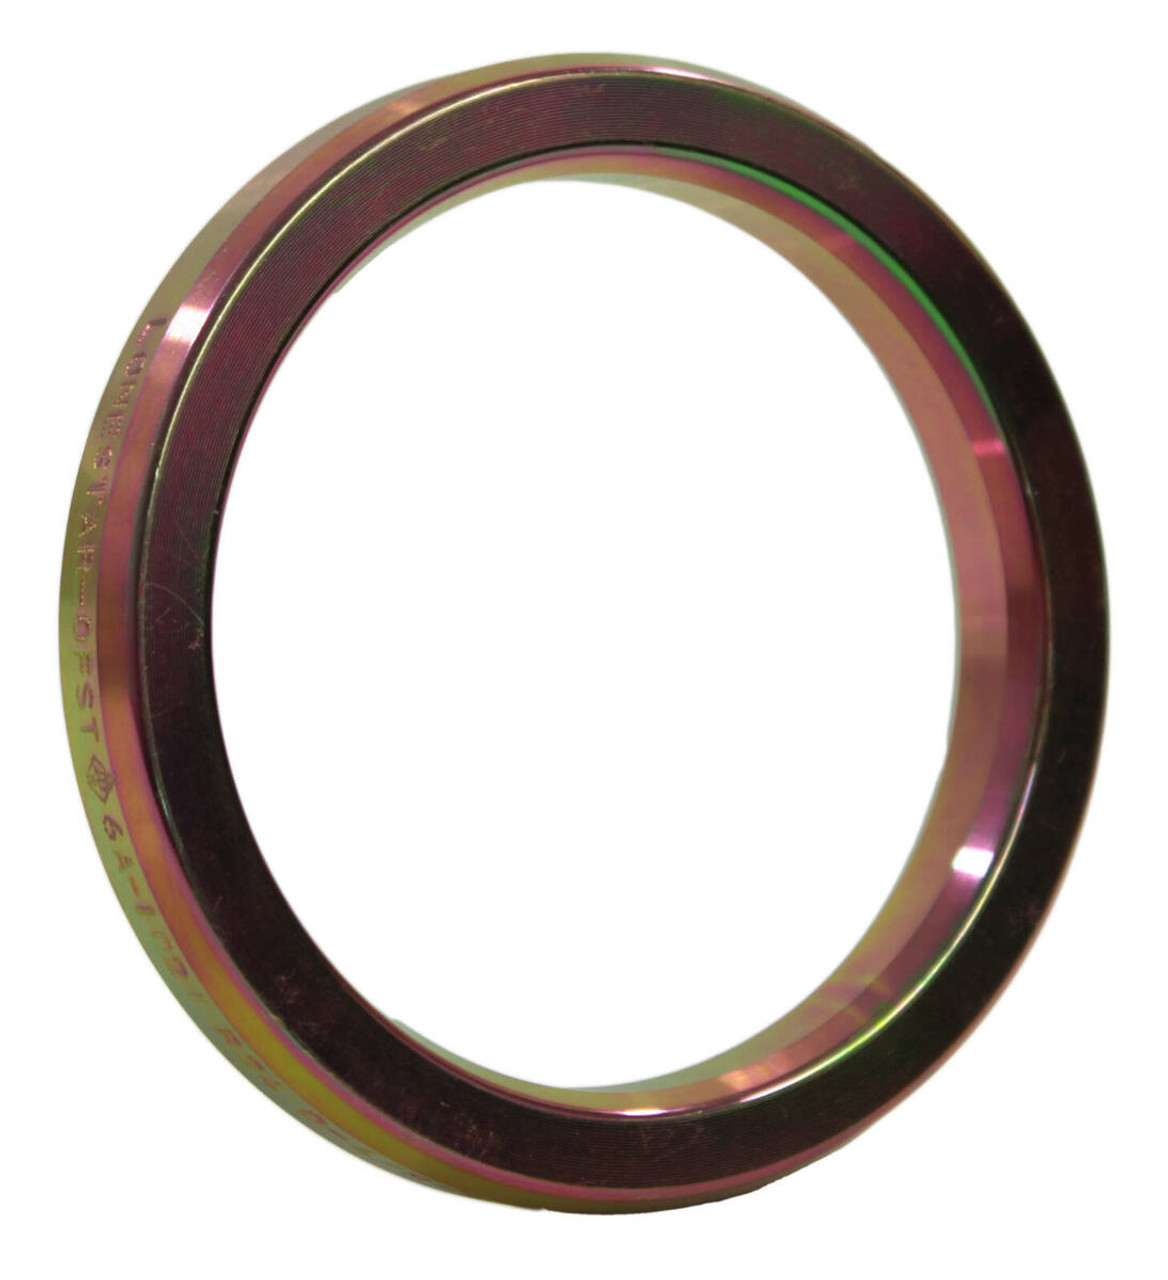 Lonestar R24 Joint Gasket Ring Diameter: 3 Inches, D-4/S-4 LS-C294 04/15